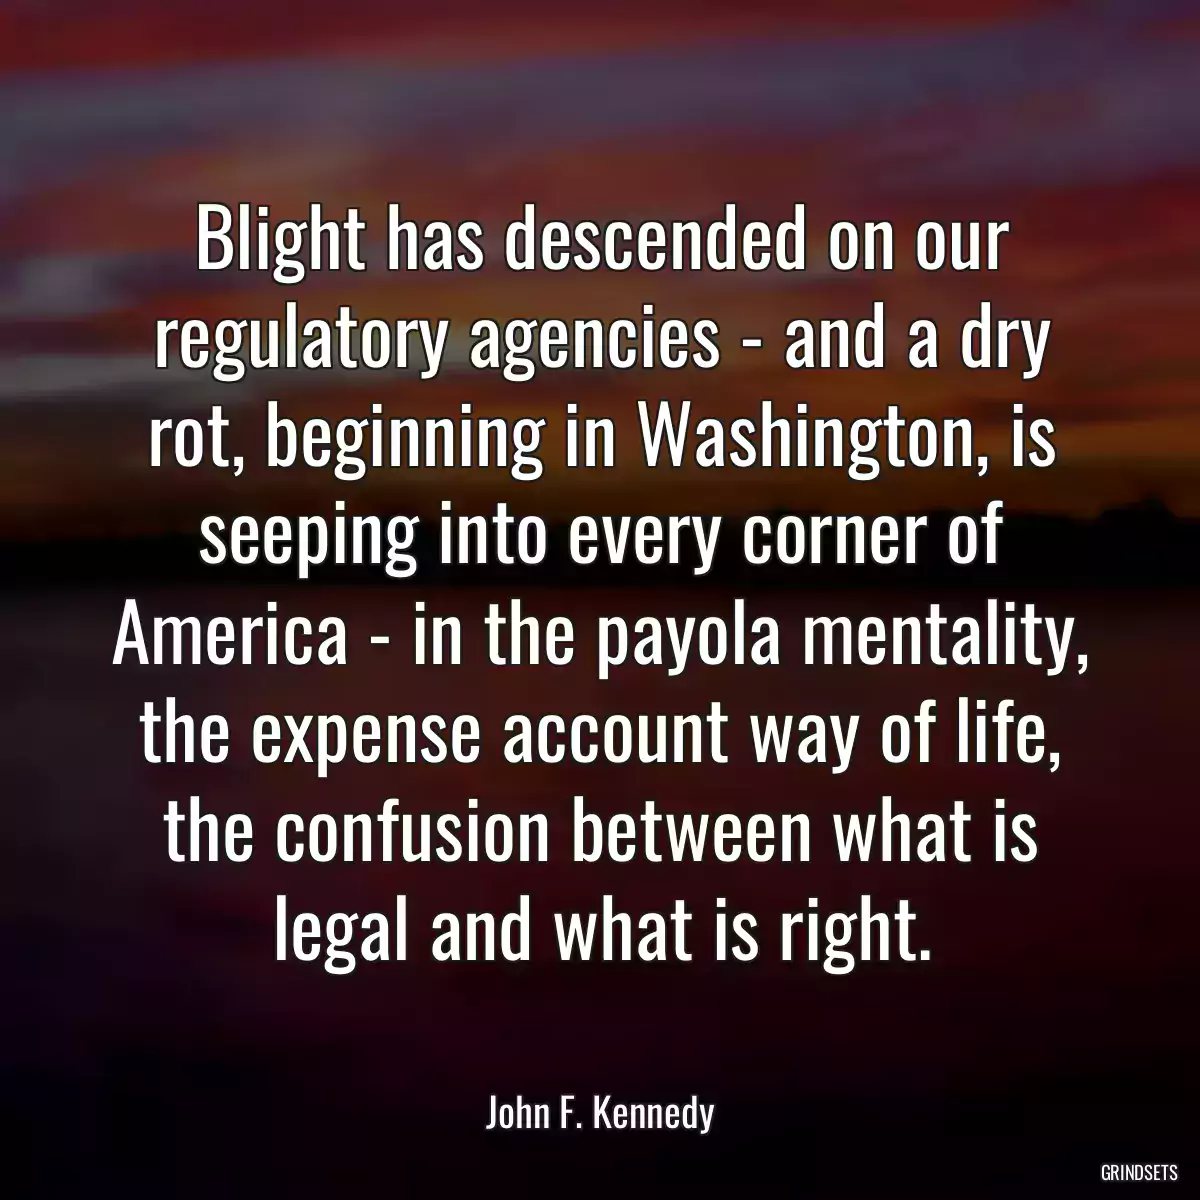 Blight has descended on our regulatory agencies - and a dry rot, beginning in Washington, is seeping into every corner of America - in the payola mentality, the expense account way of life, the confusion between what is legal and what is right.